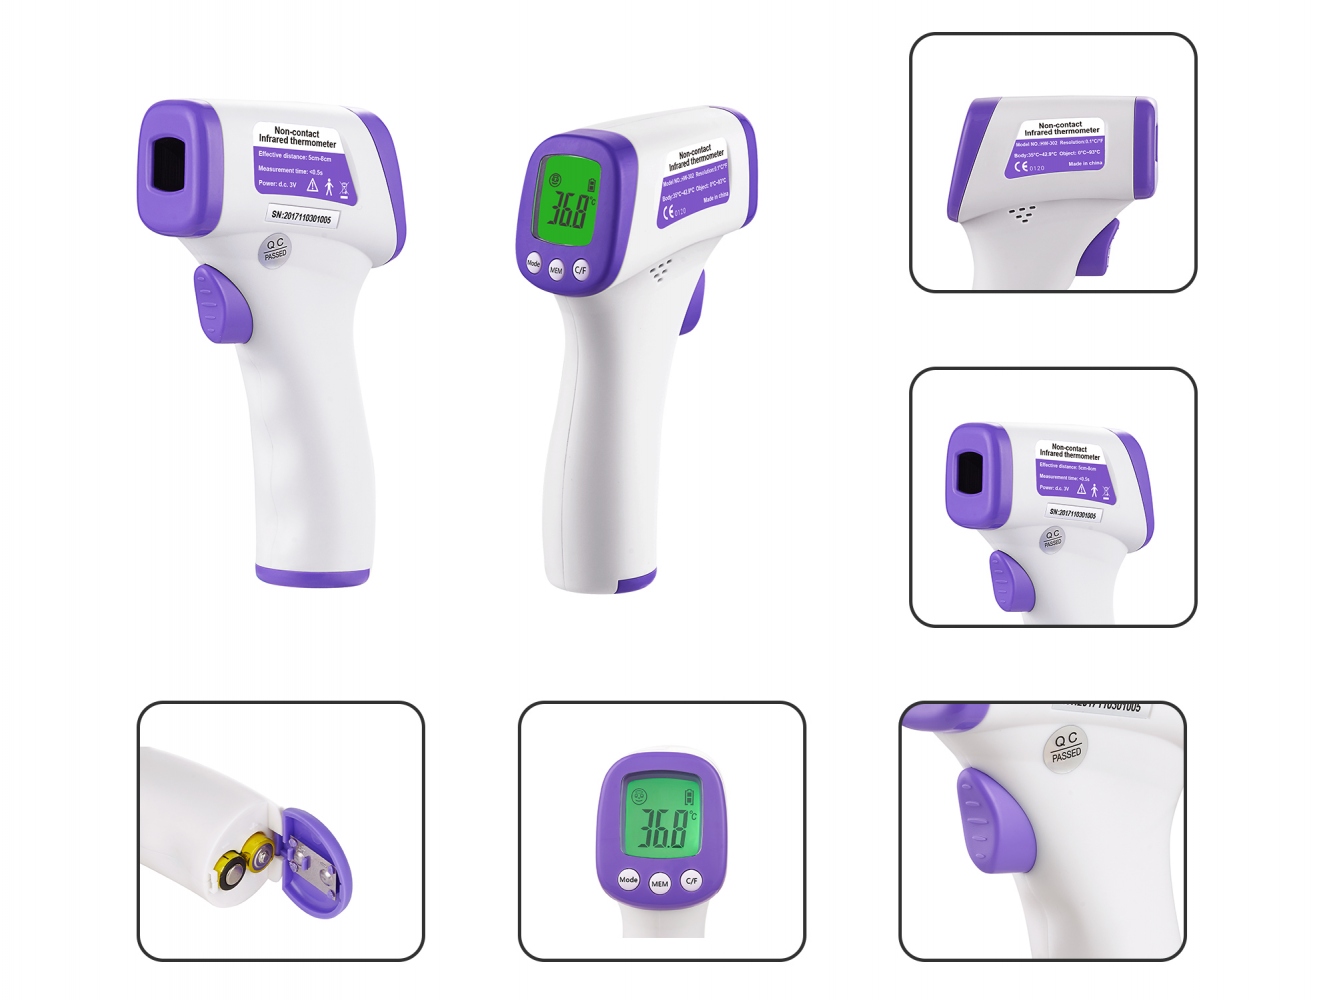 pics/simzo/simzo-hw-302-infrared-thermometer-details.jpg